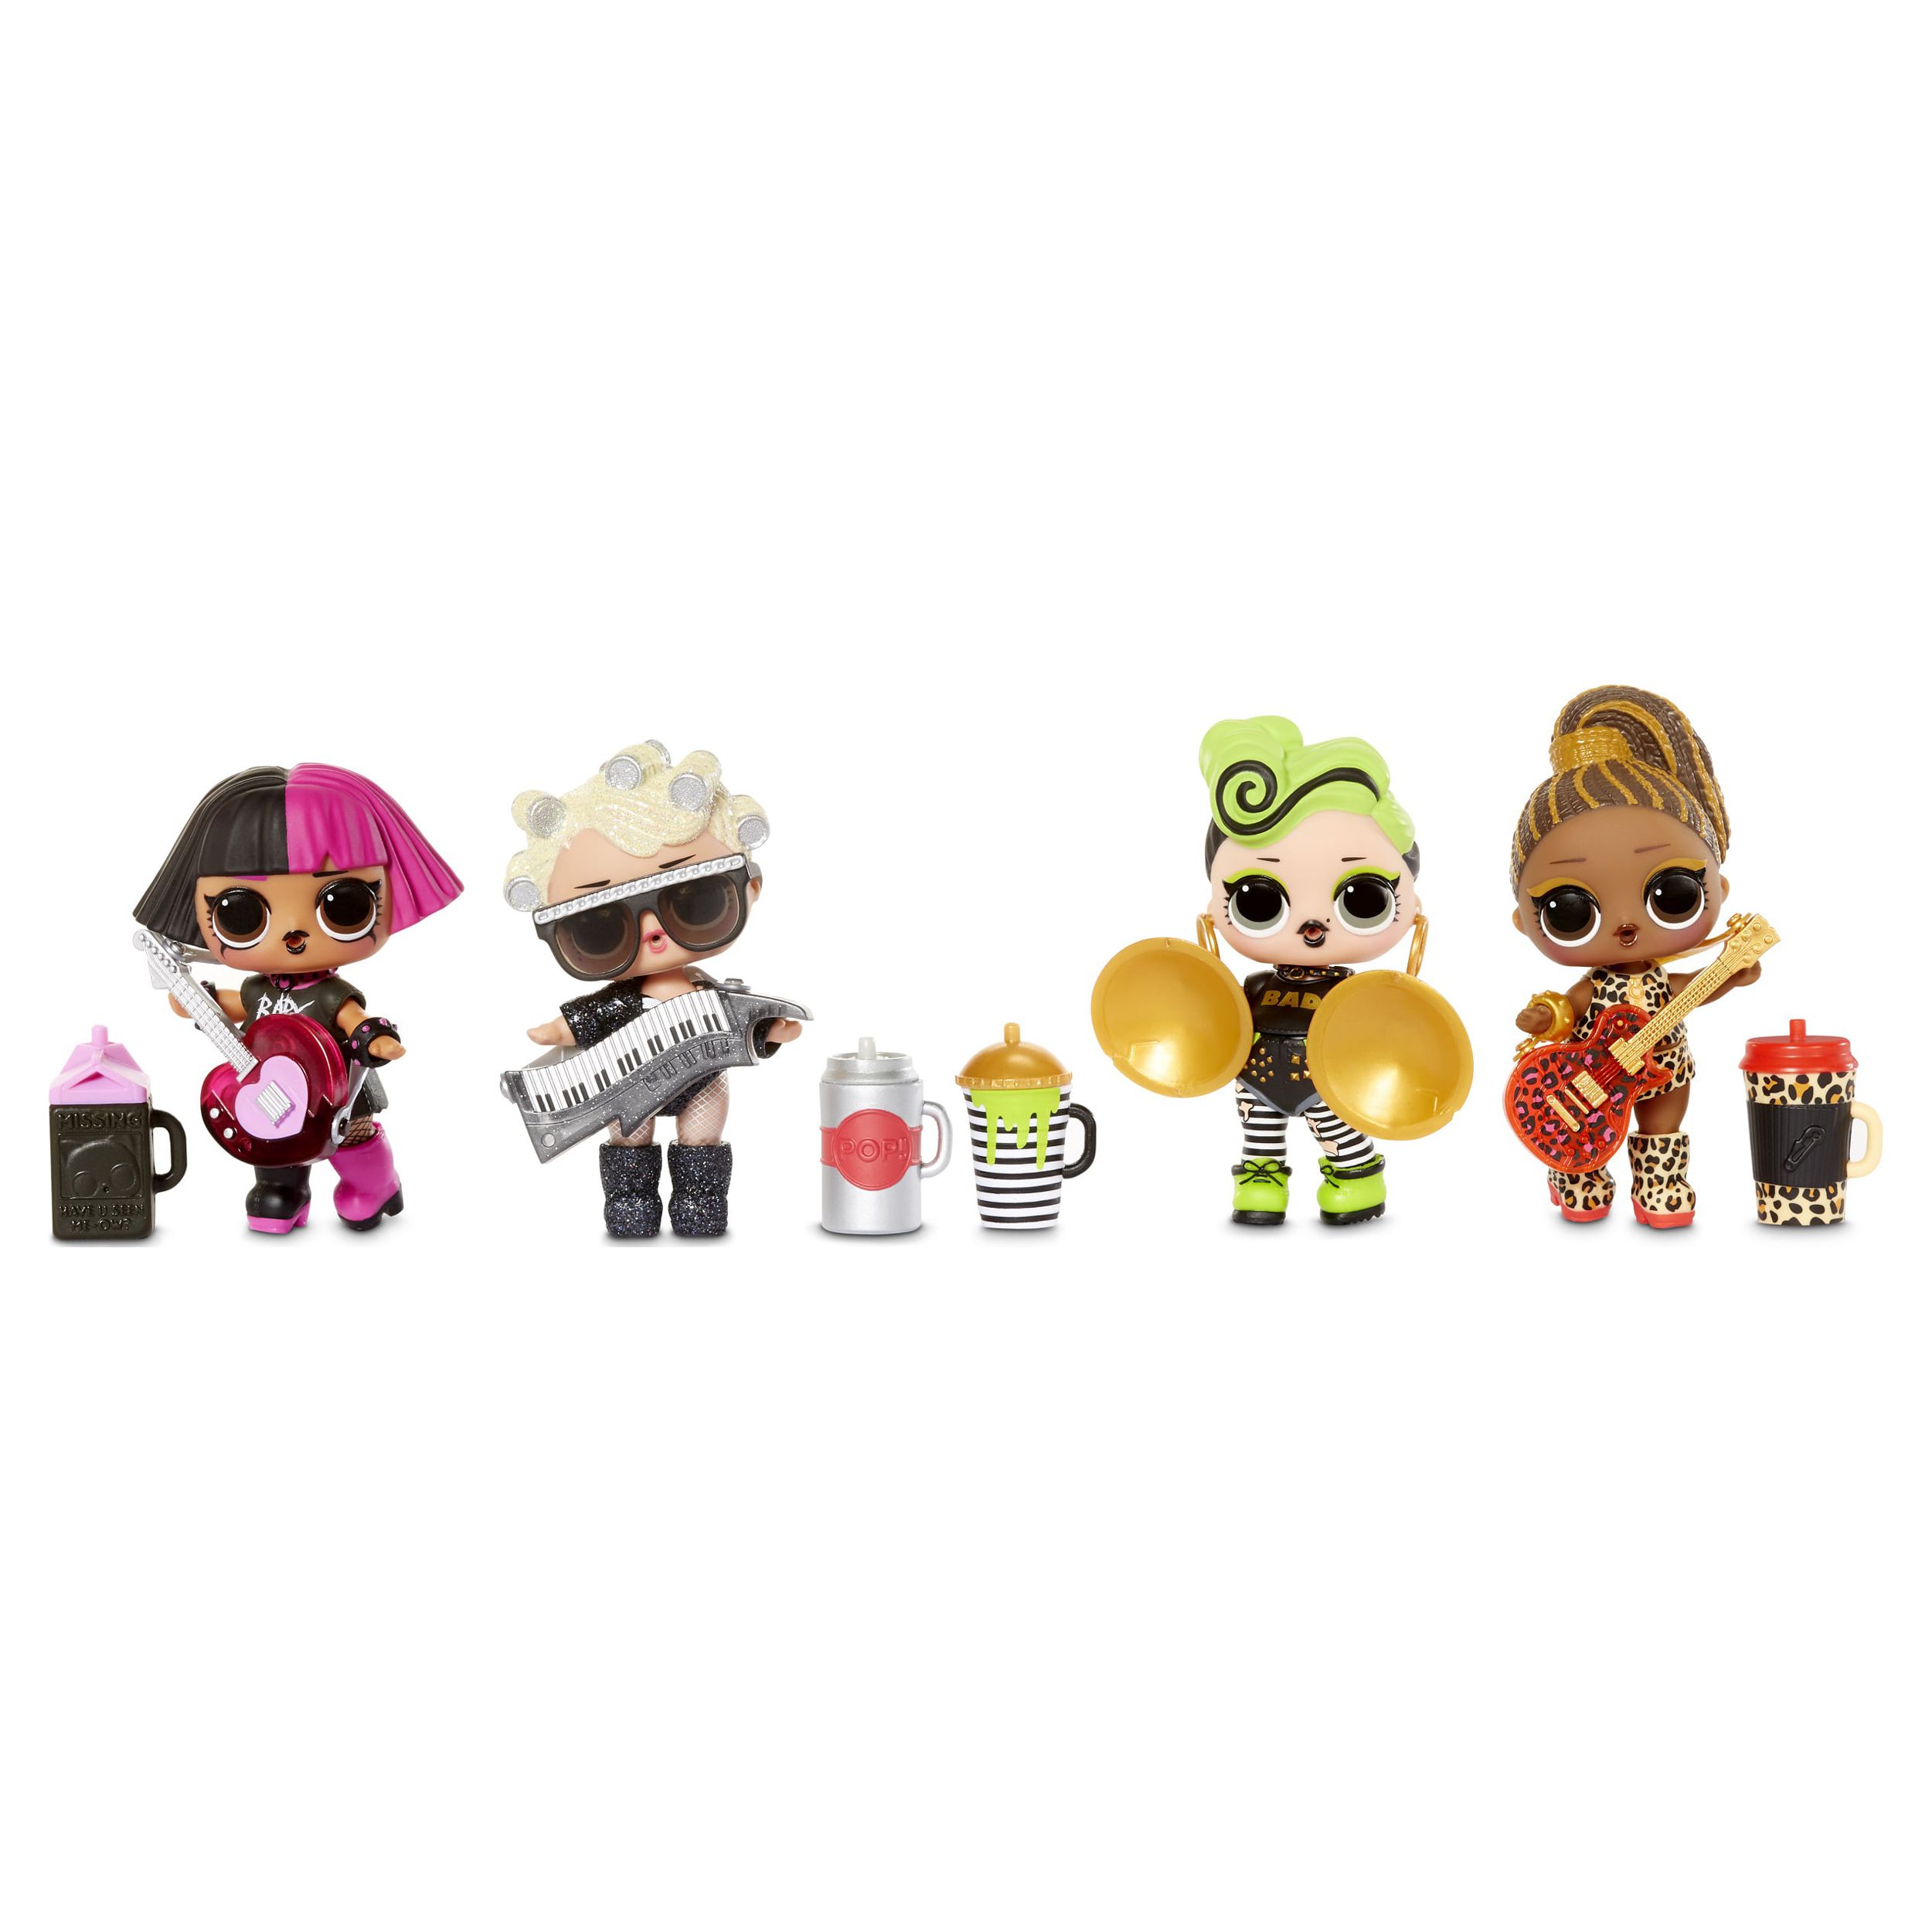 LOL Surprise OMG Remix Super Surprise With 70+ Surprises Including 4 Fashion Dolls And 4 Dolls (Sisters), Rock Instruments That Really Play Music, Boom Box Packaging, Rock Band Accessories Ages 4+ - image 4 of 4